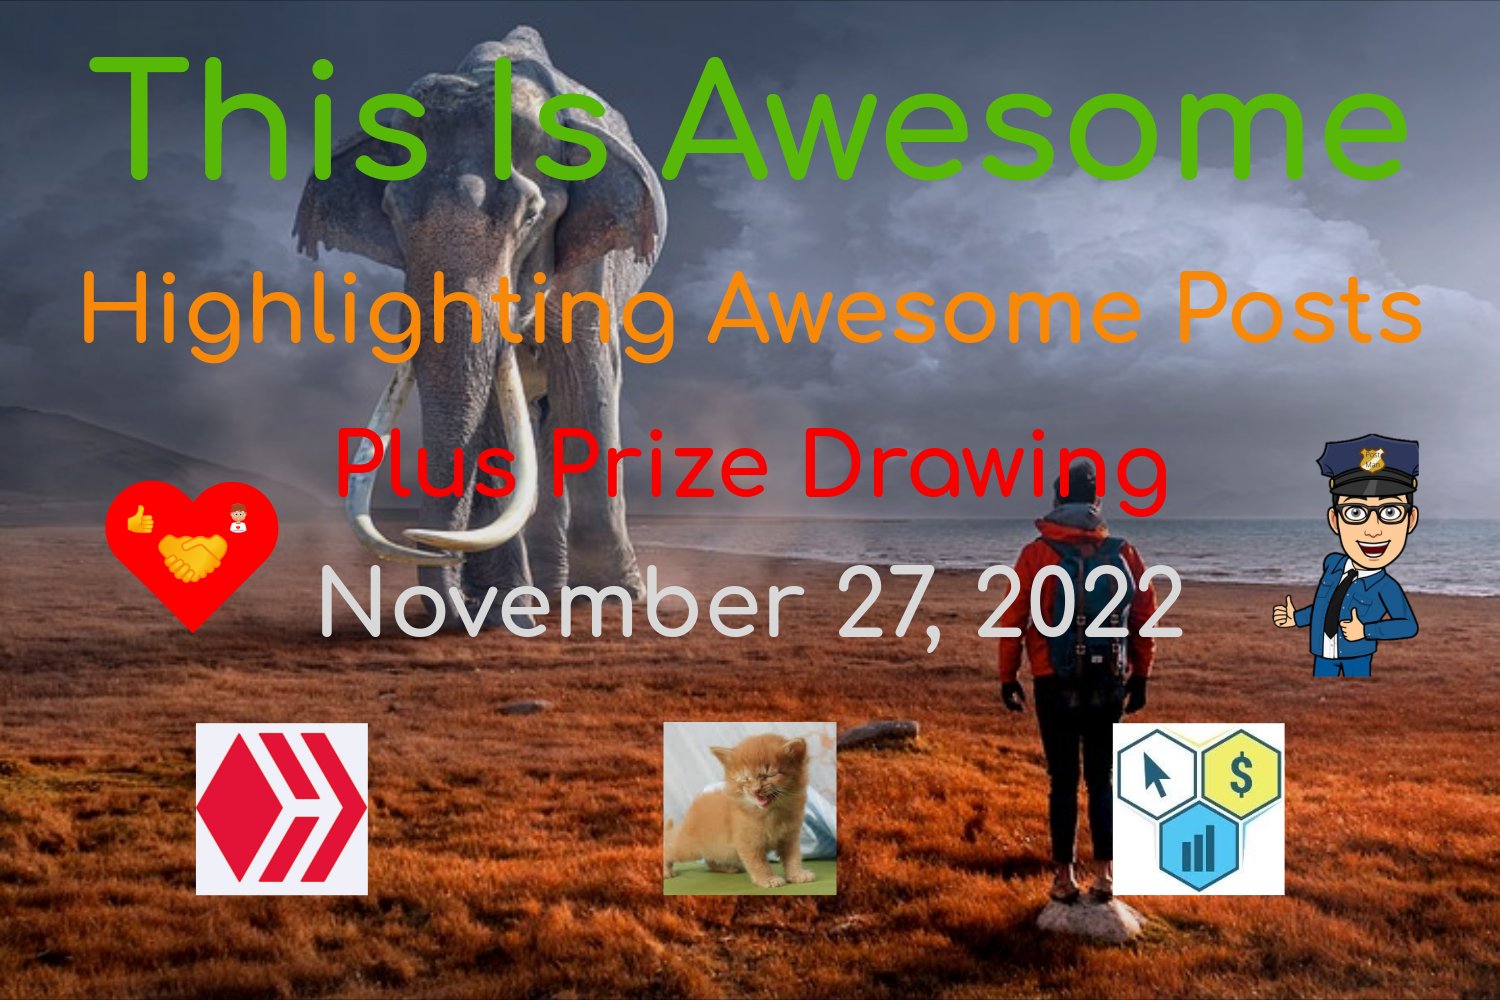 @thisisawesome/this-is-awesome-highlighting-awesome-posts-plus-prize-drawing-november-27-2022